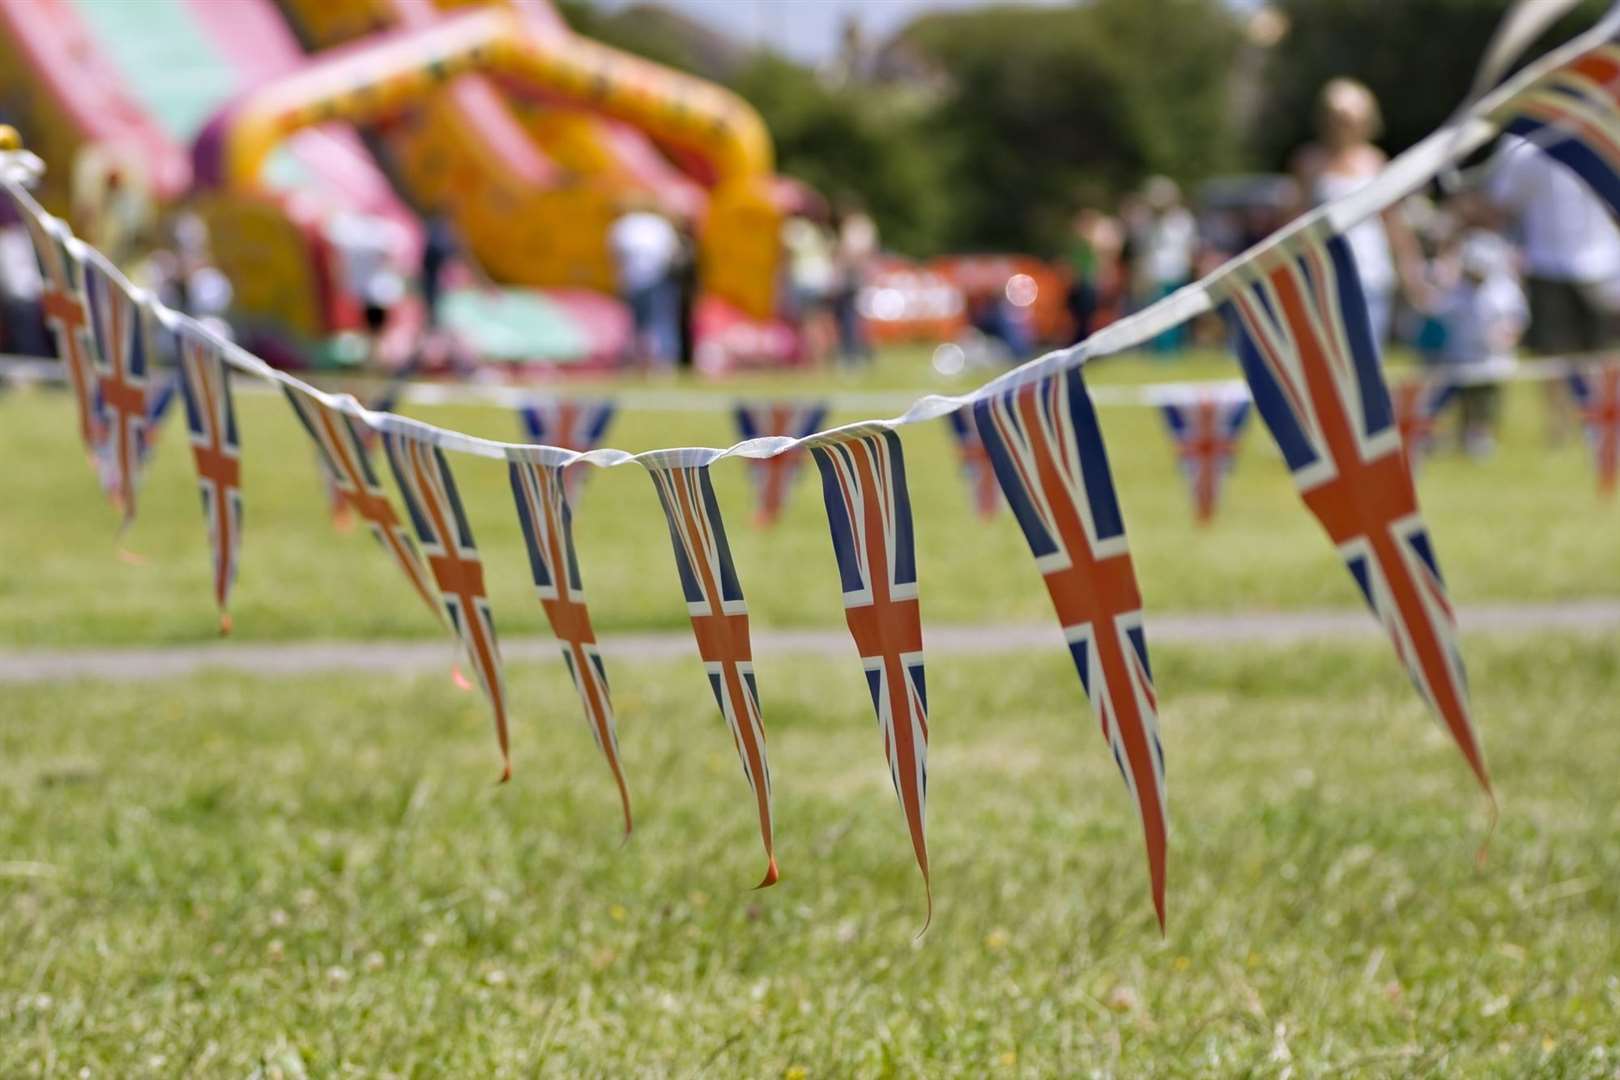 Do you need food for street parties and picnics? Photo: iStock.